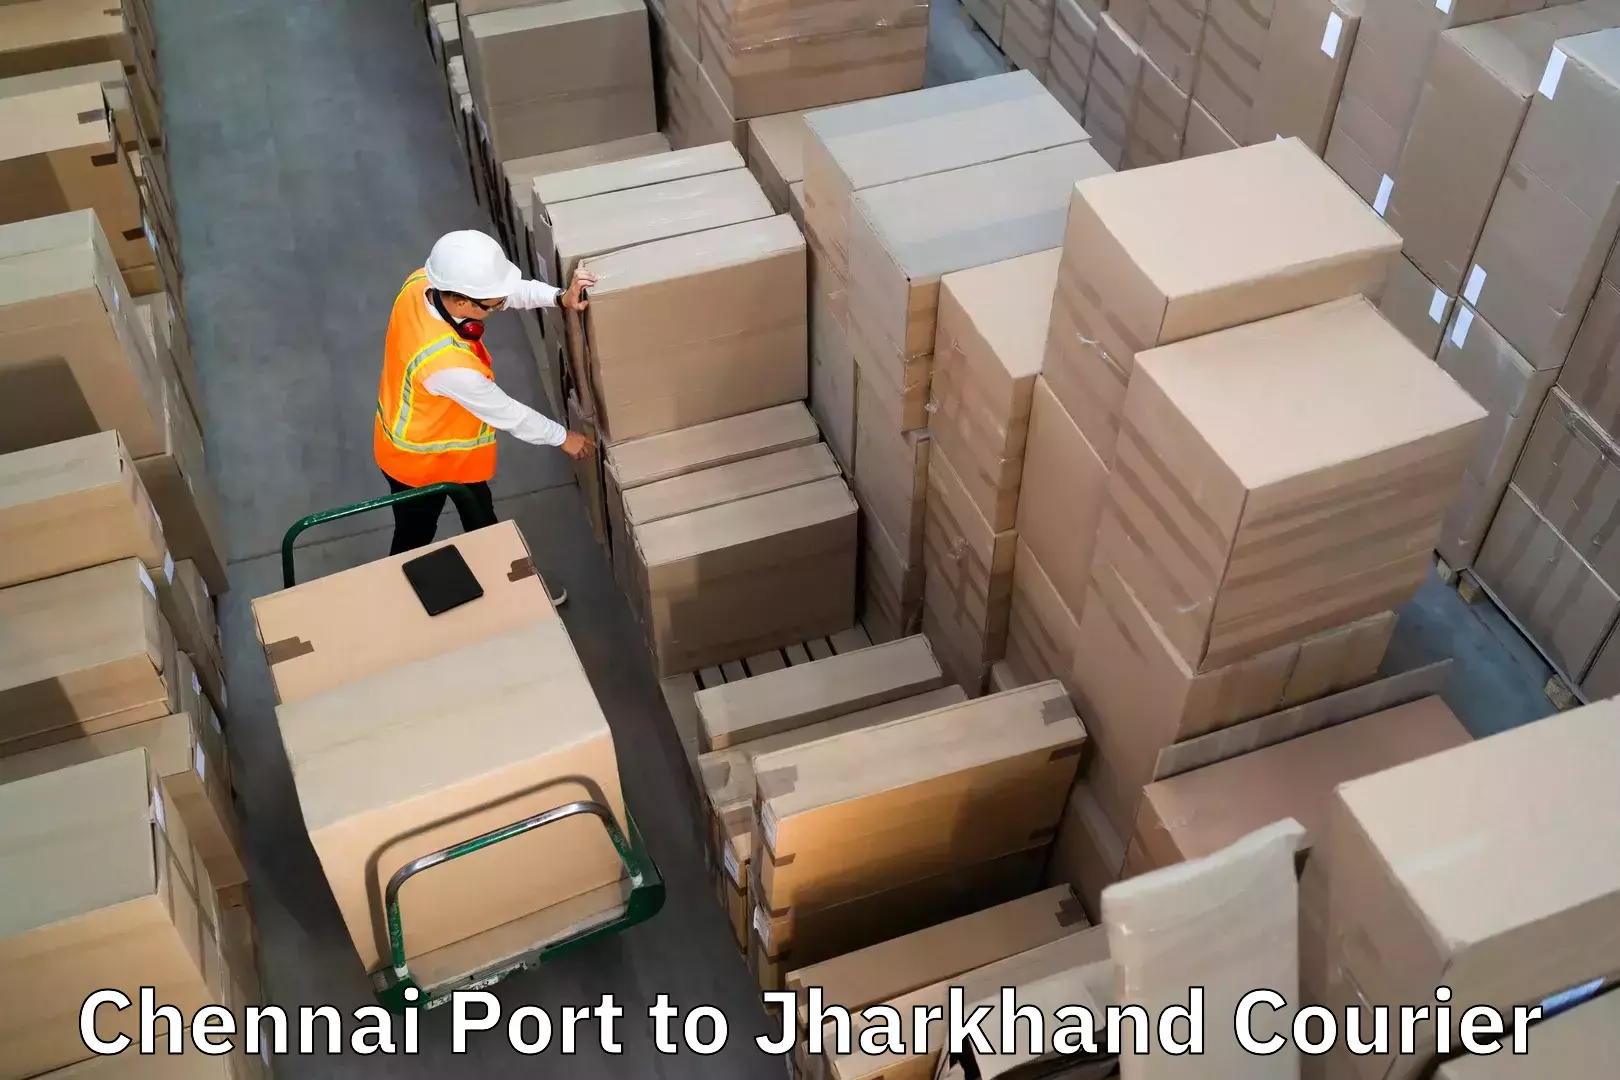 Fast track baggage delivery in Chennai Port to Mahagama